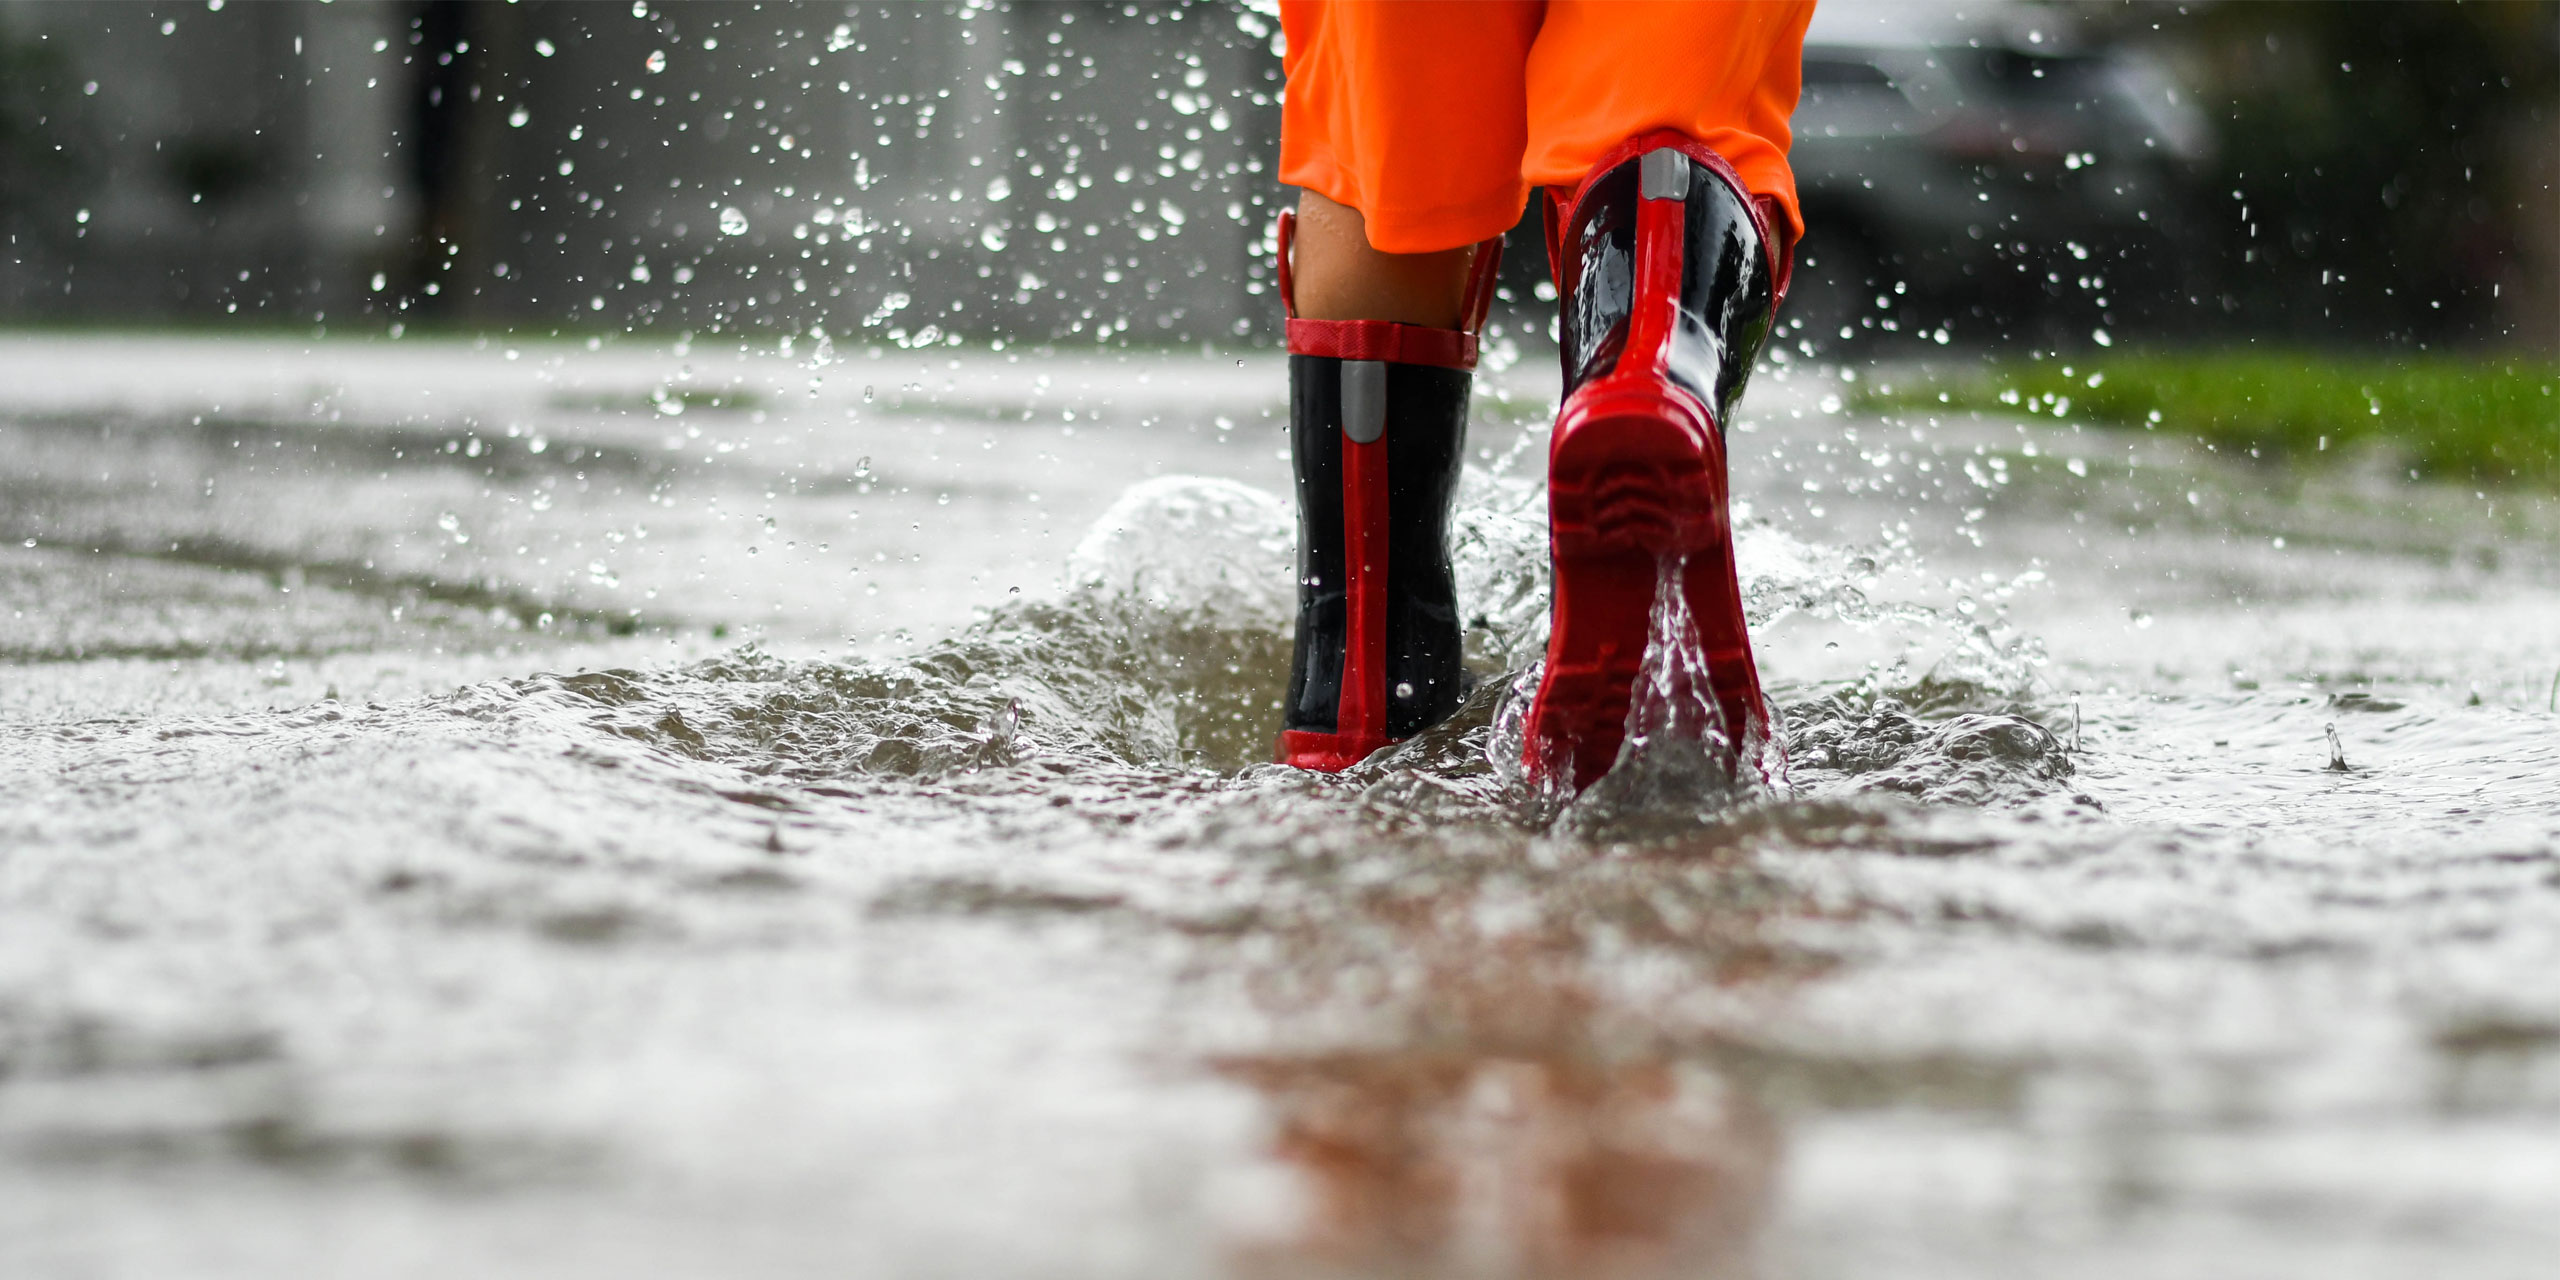 Rainboots In Rain Puddle; Courtesy of Joy Youell/Shutterstock.com